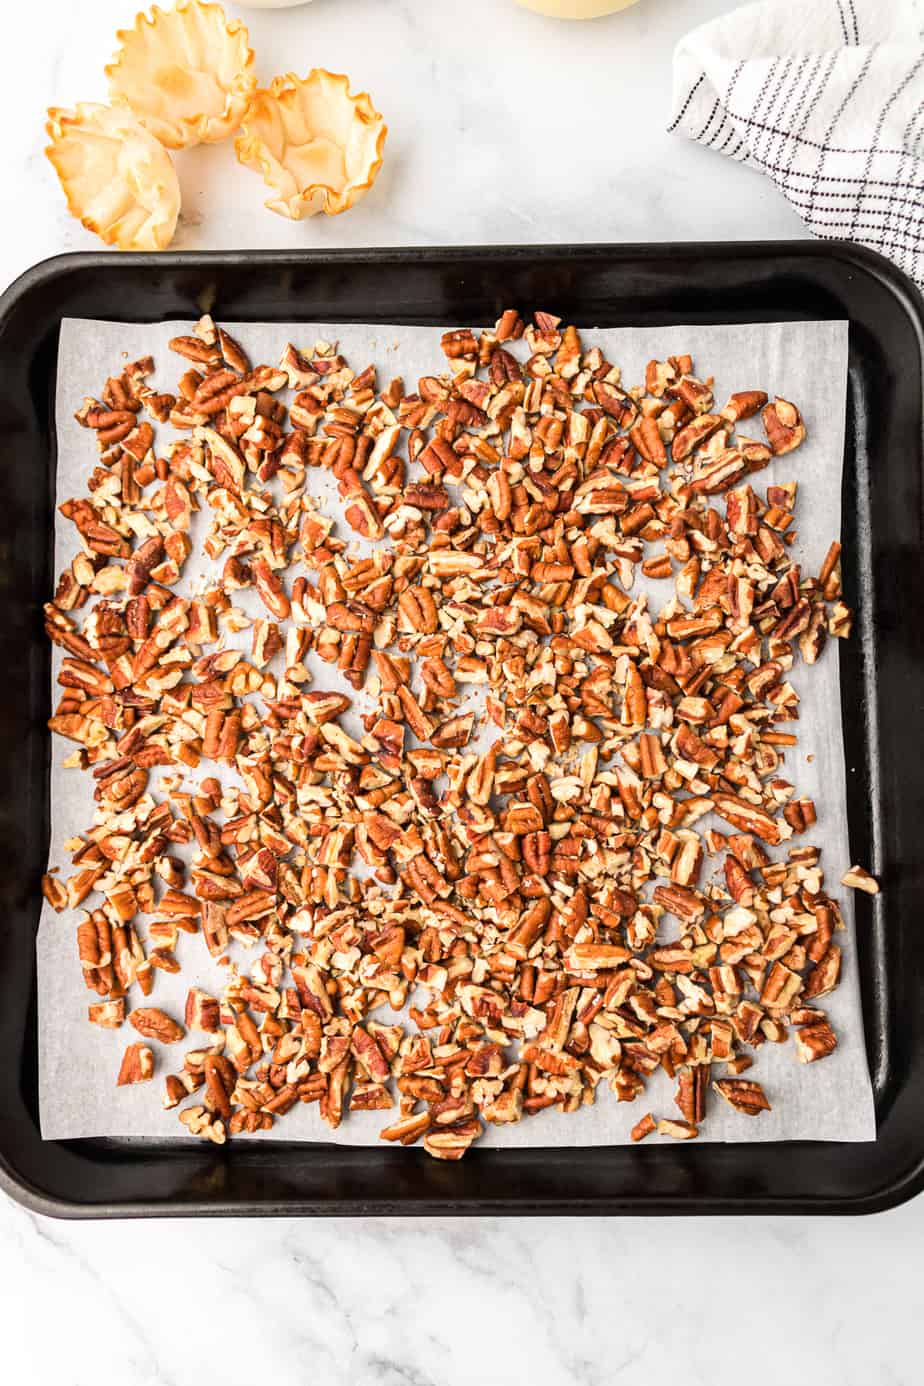 Chopped pecans on a baking pan lined with parchment paper